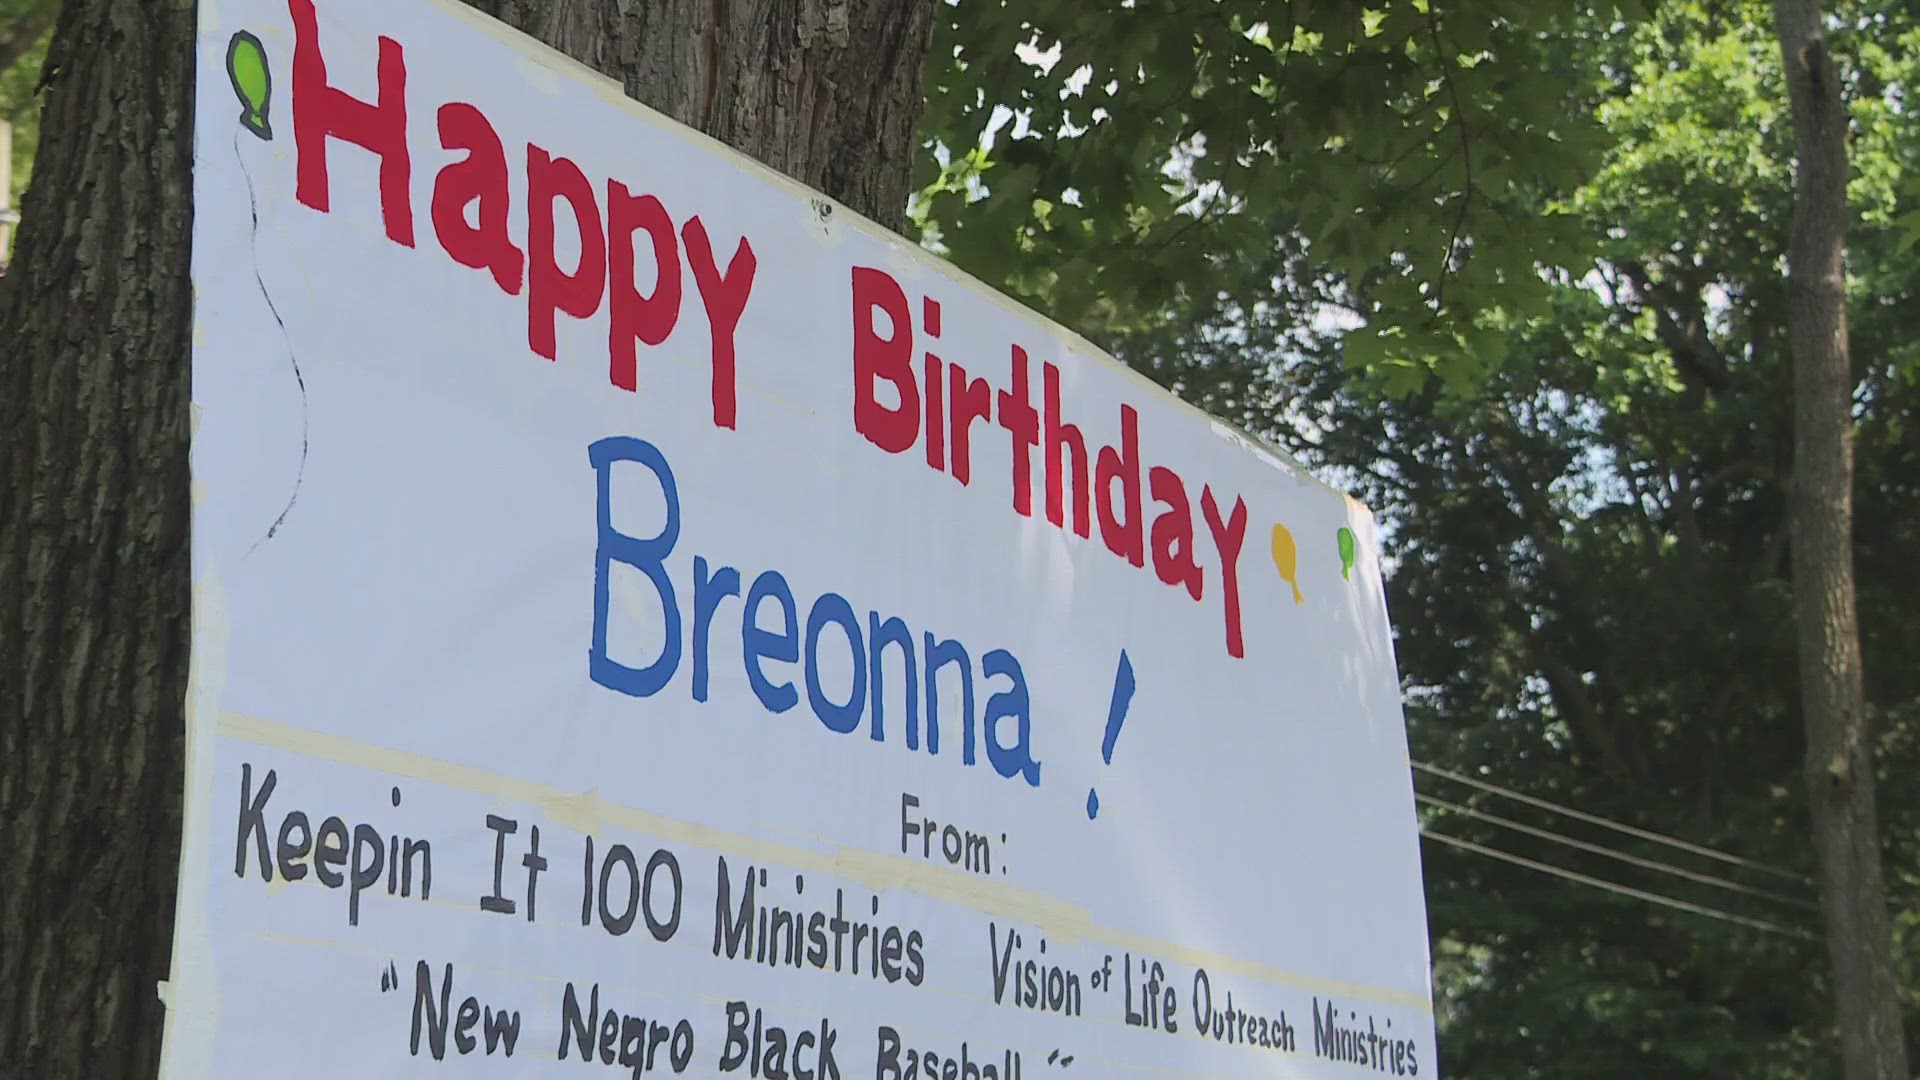 Those who knew her and those who came to know of her in death remembered Breonna's legacy while celebrating another birthday without her.